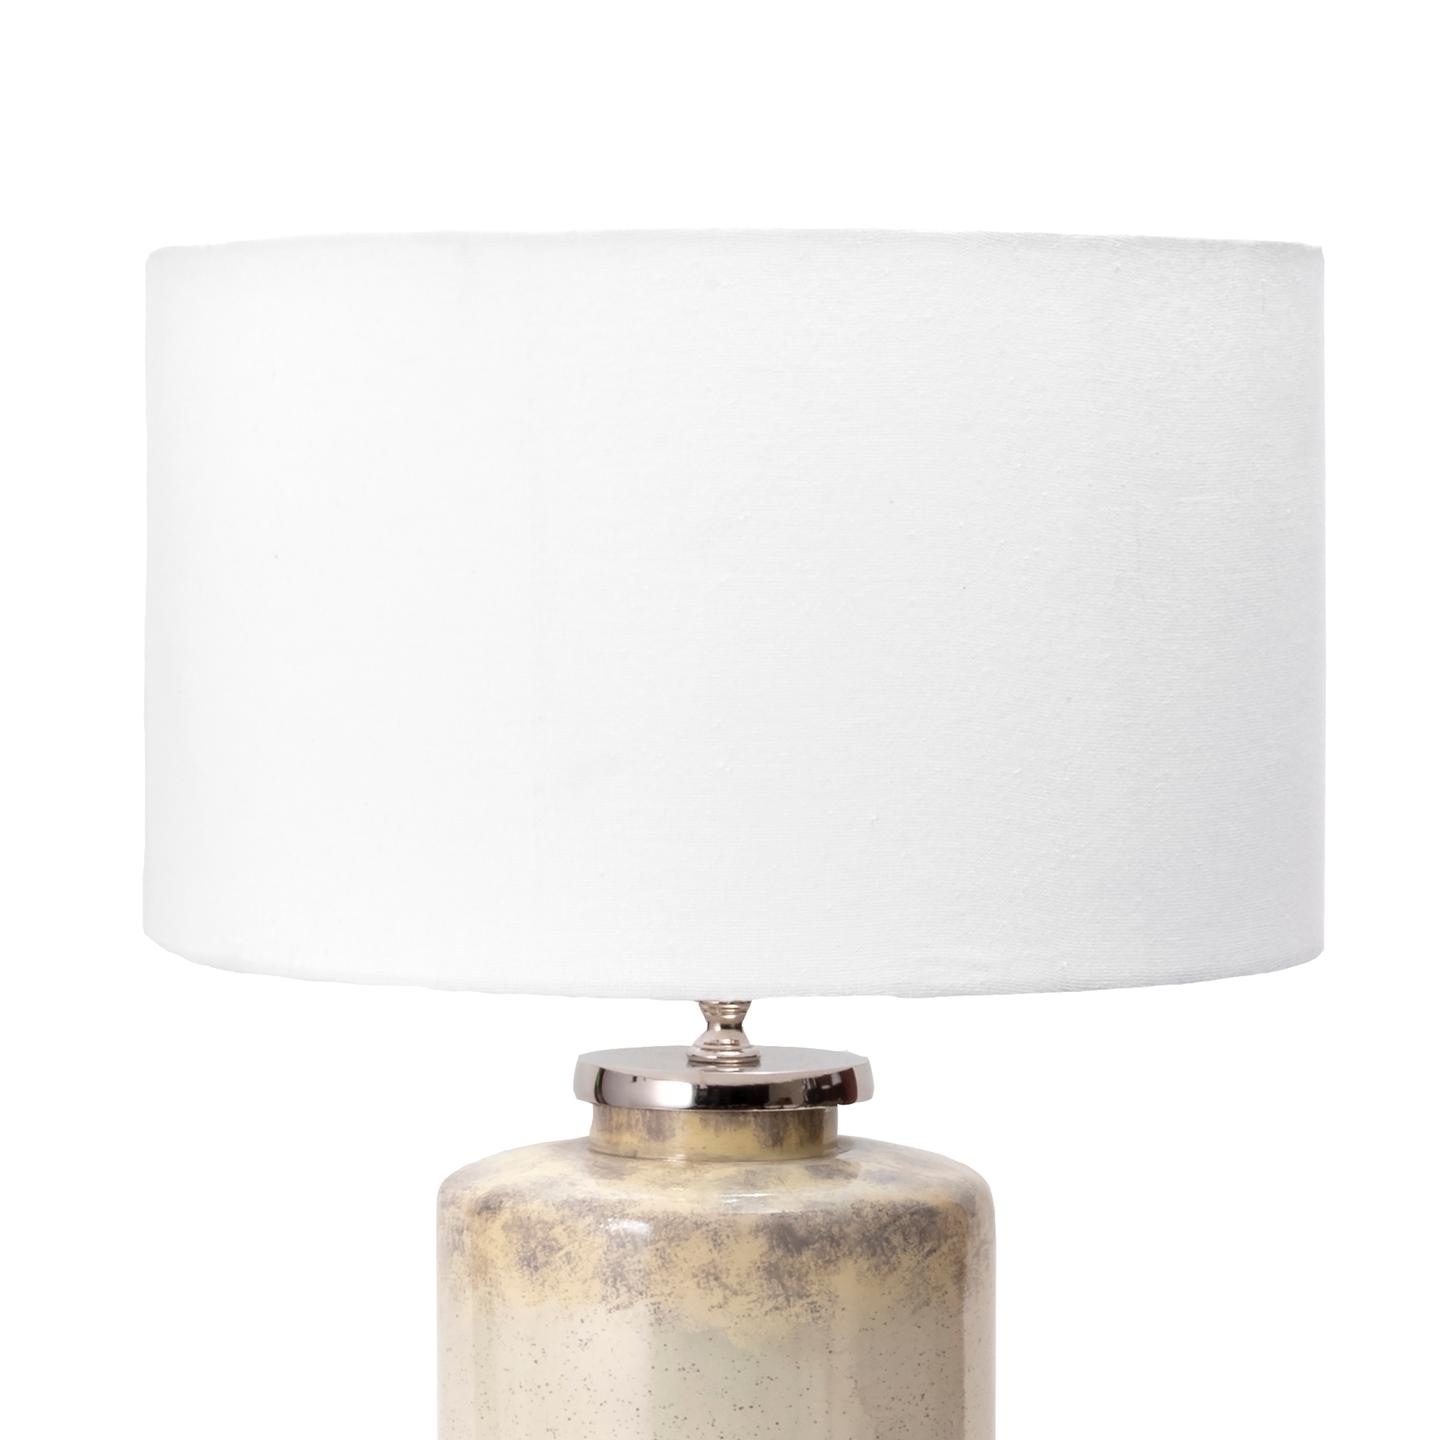 Sitka 21" Glass Table Lamp - Image 4